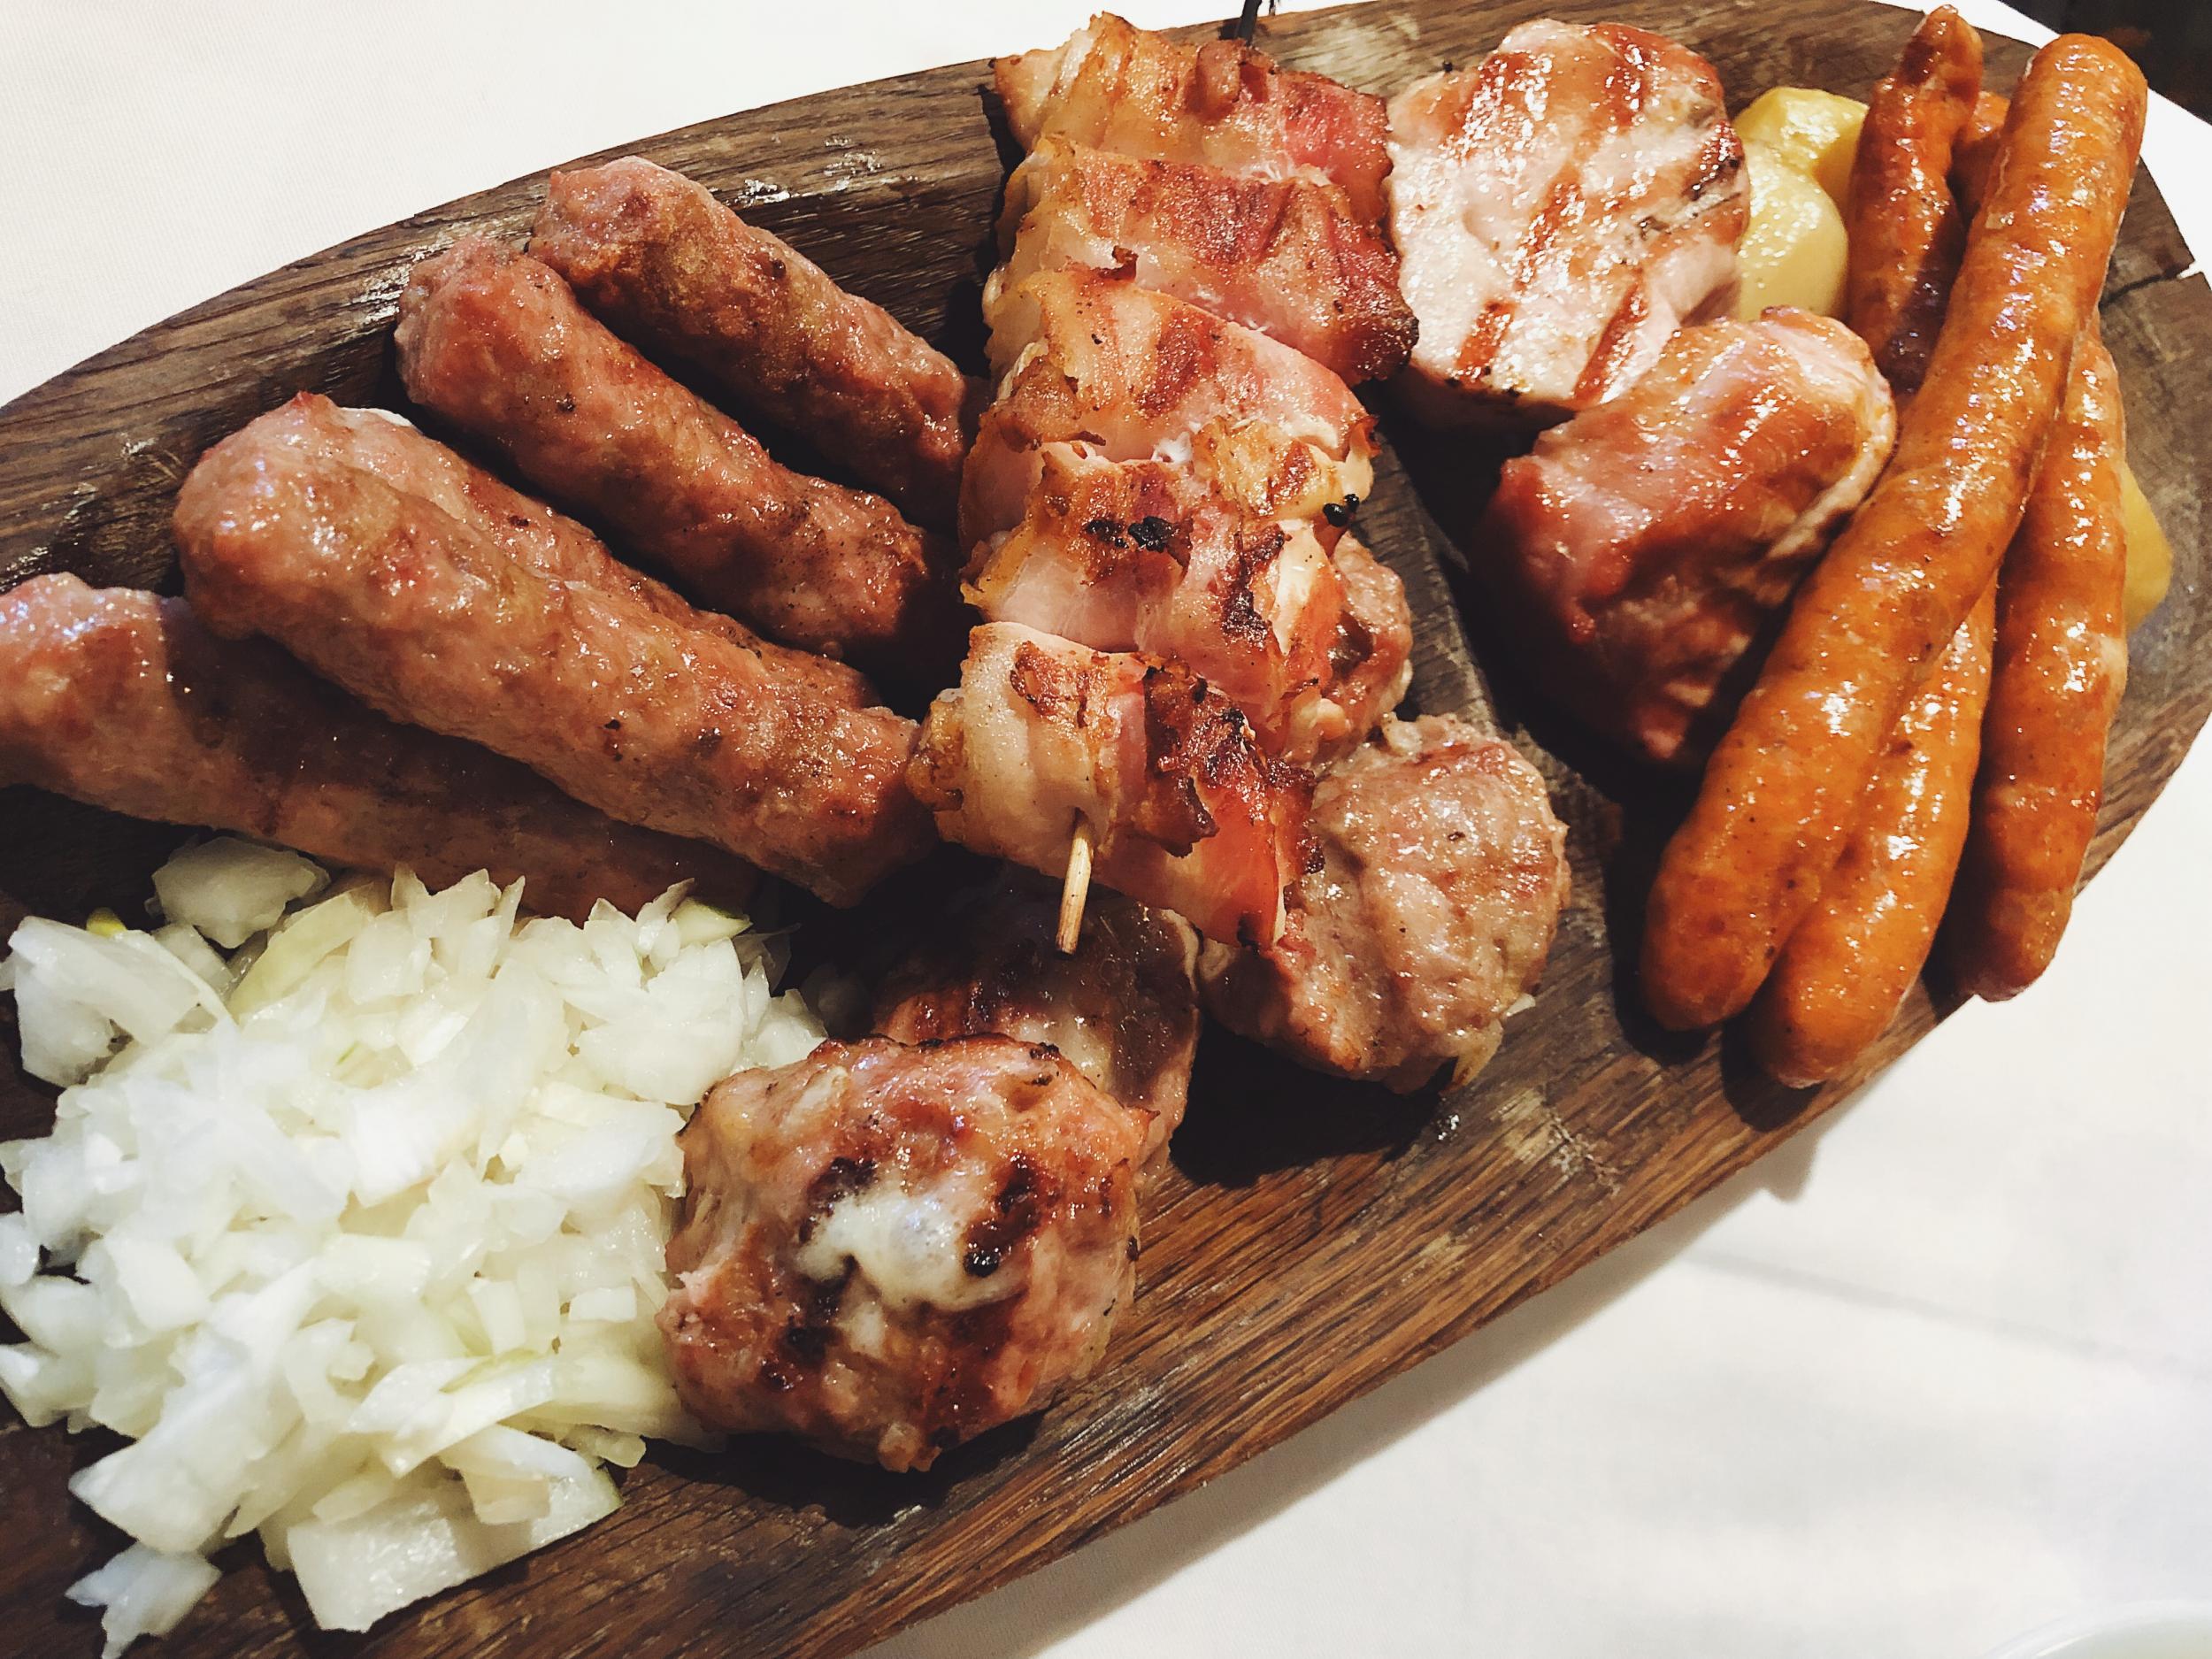 The ultimate meat platter at Sokace